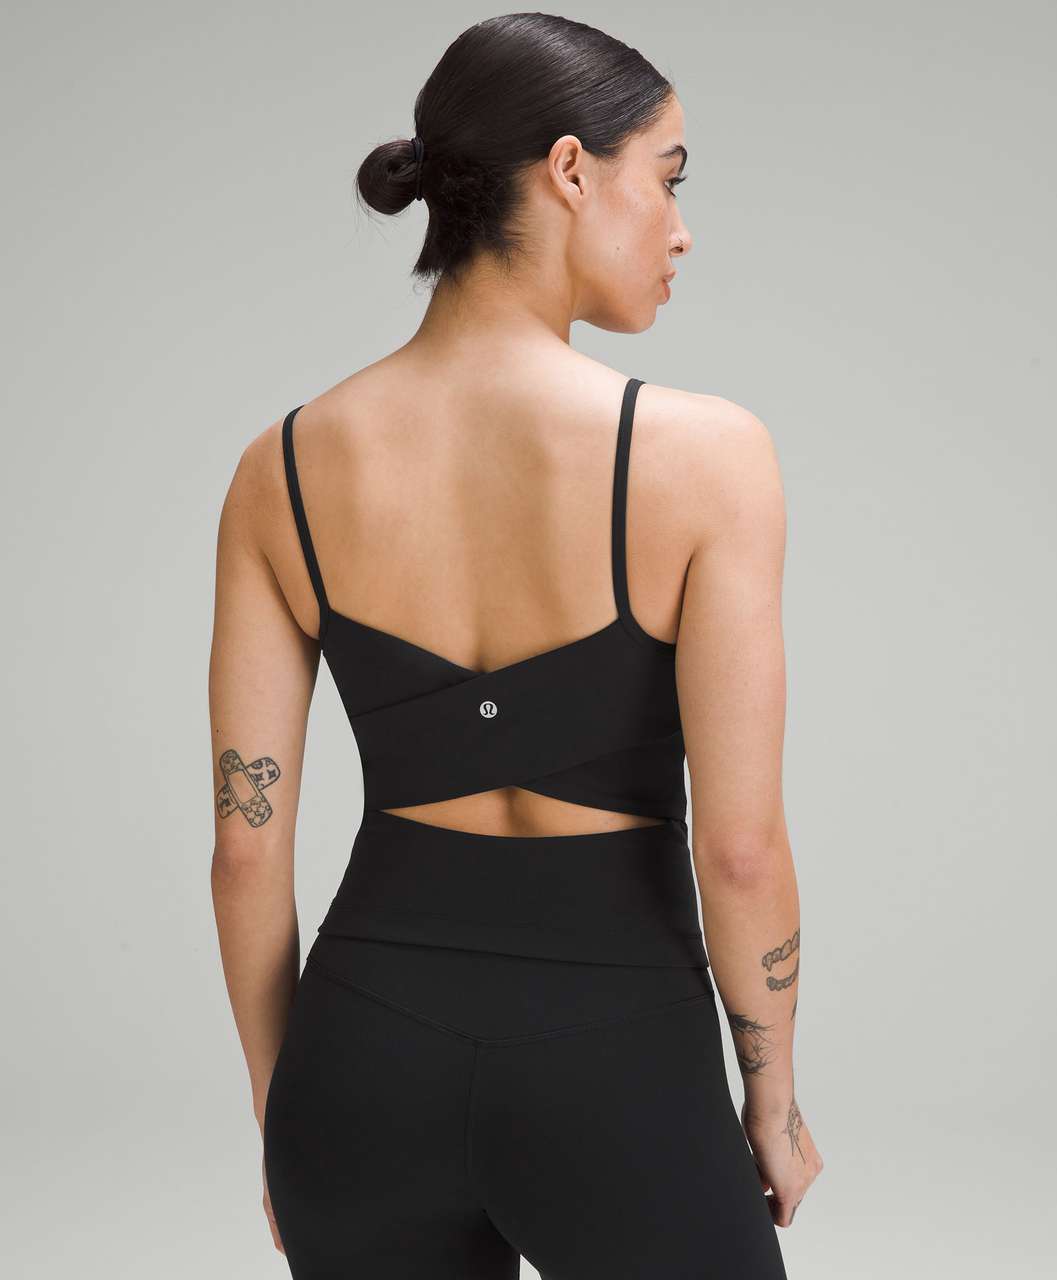 Our 8 Favorite Lululemon Workout Tops of 2023